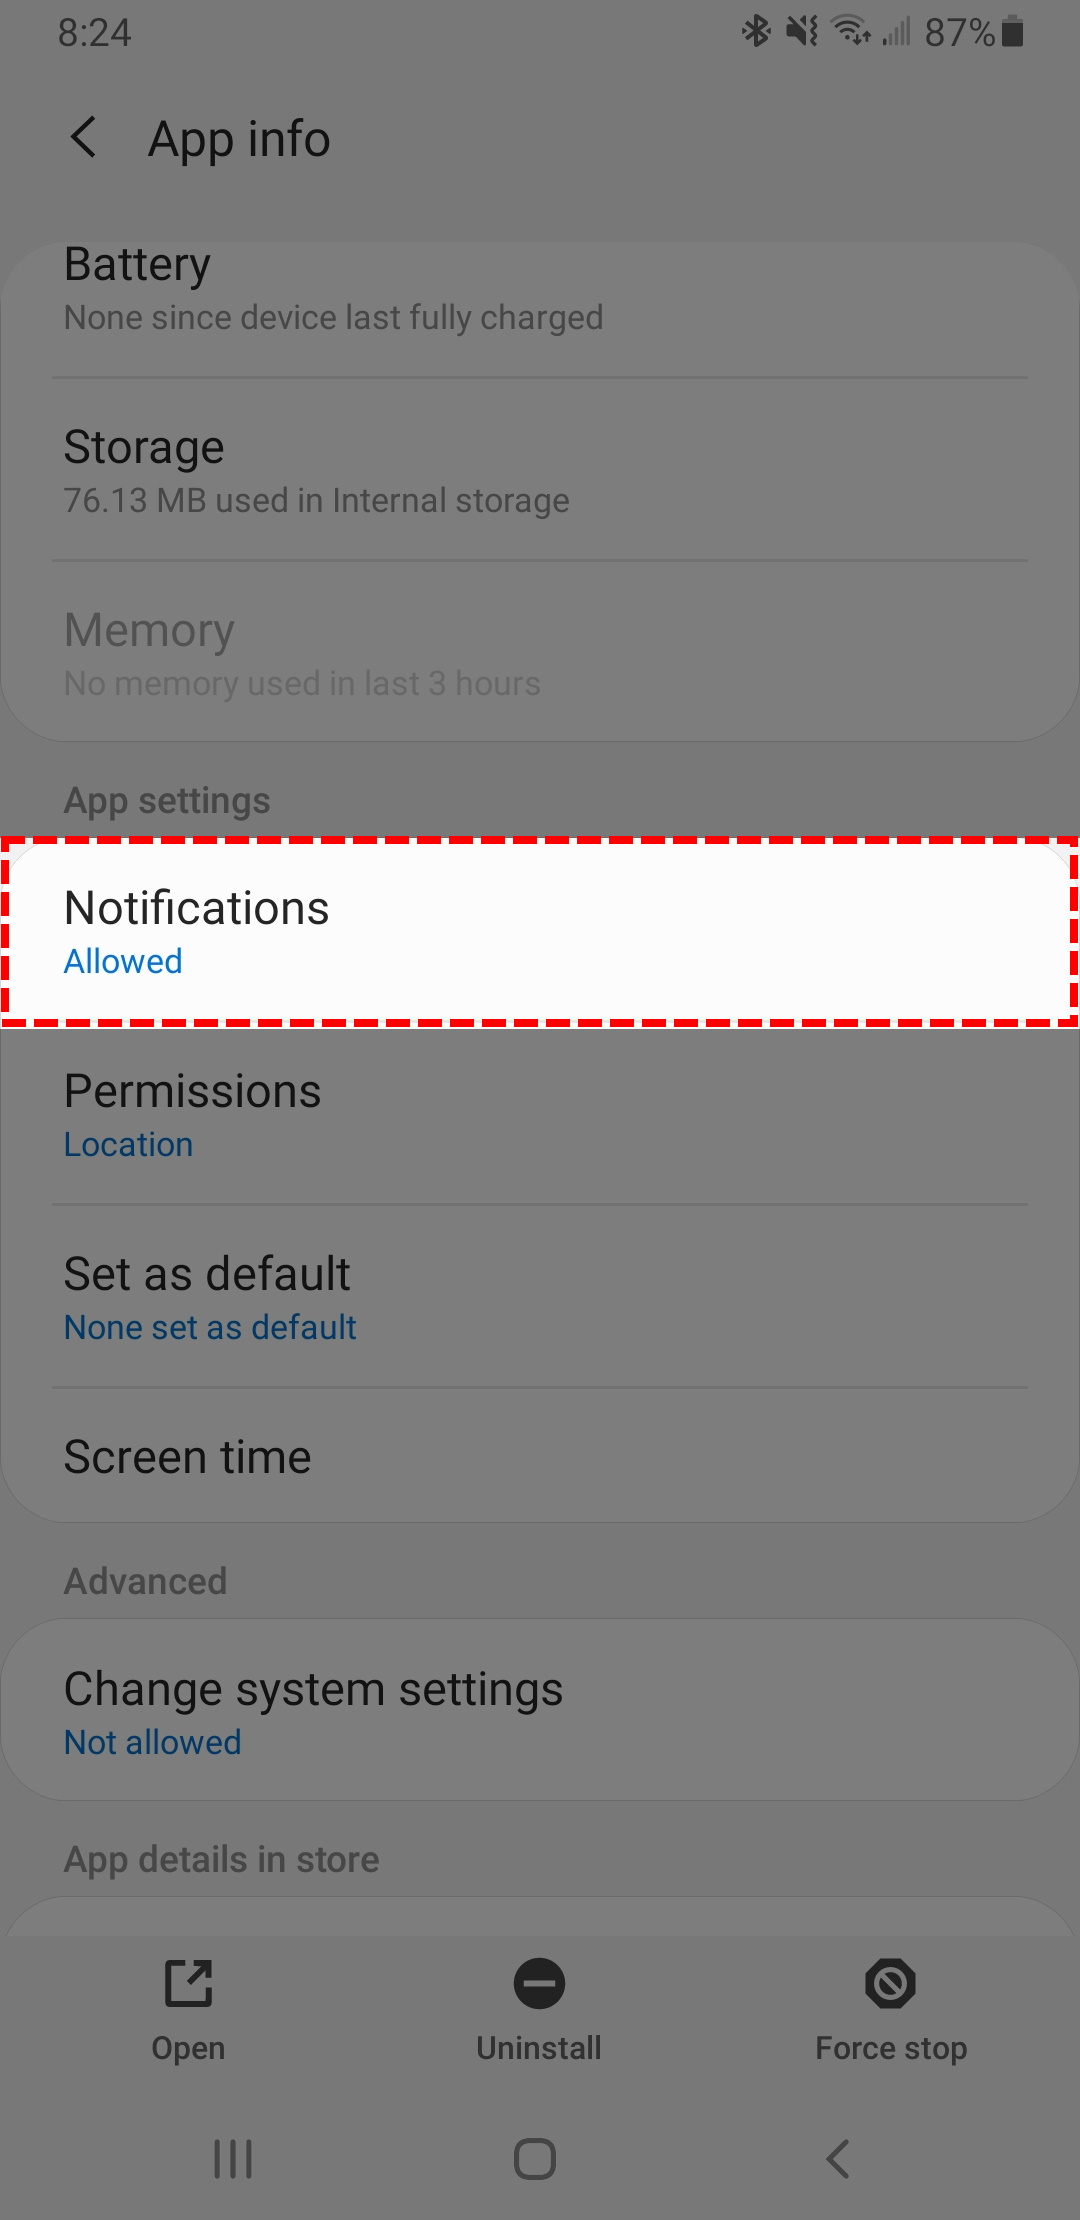 ML_app_info_screen_scrolled_to_notifications_-_Notificaitons_highlighted.jpg